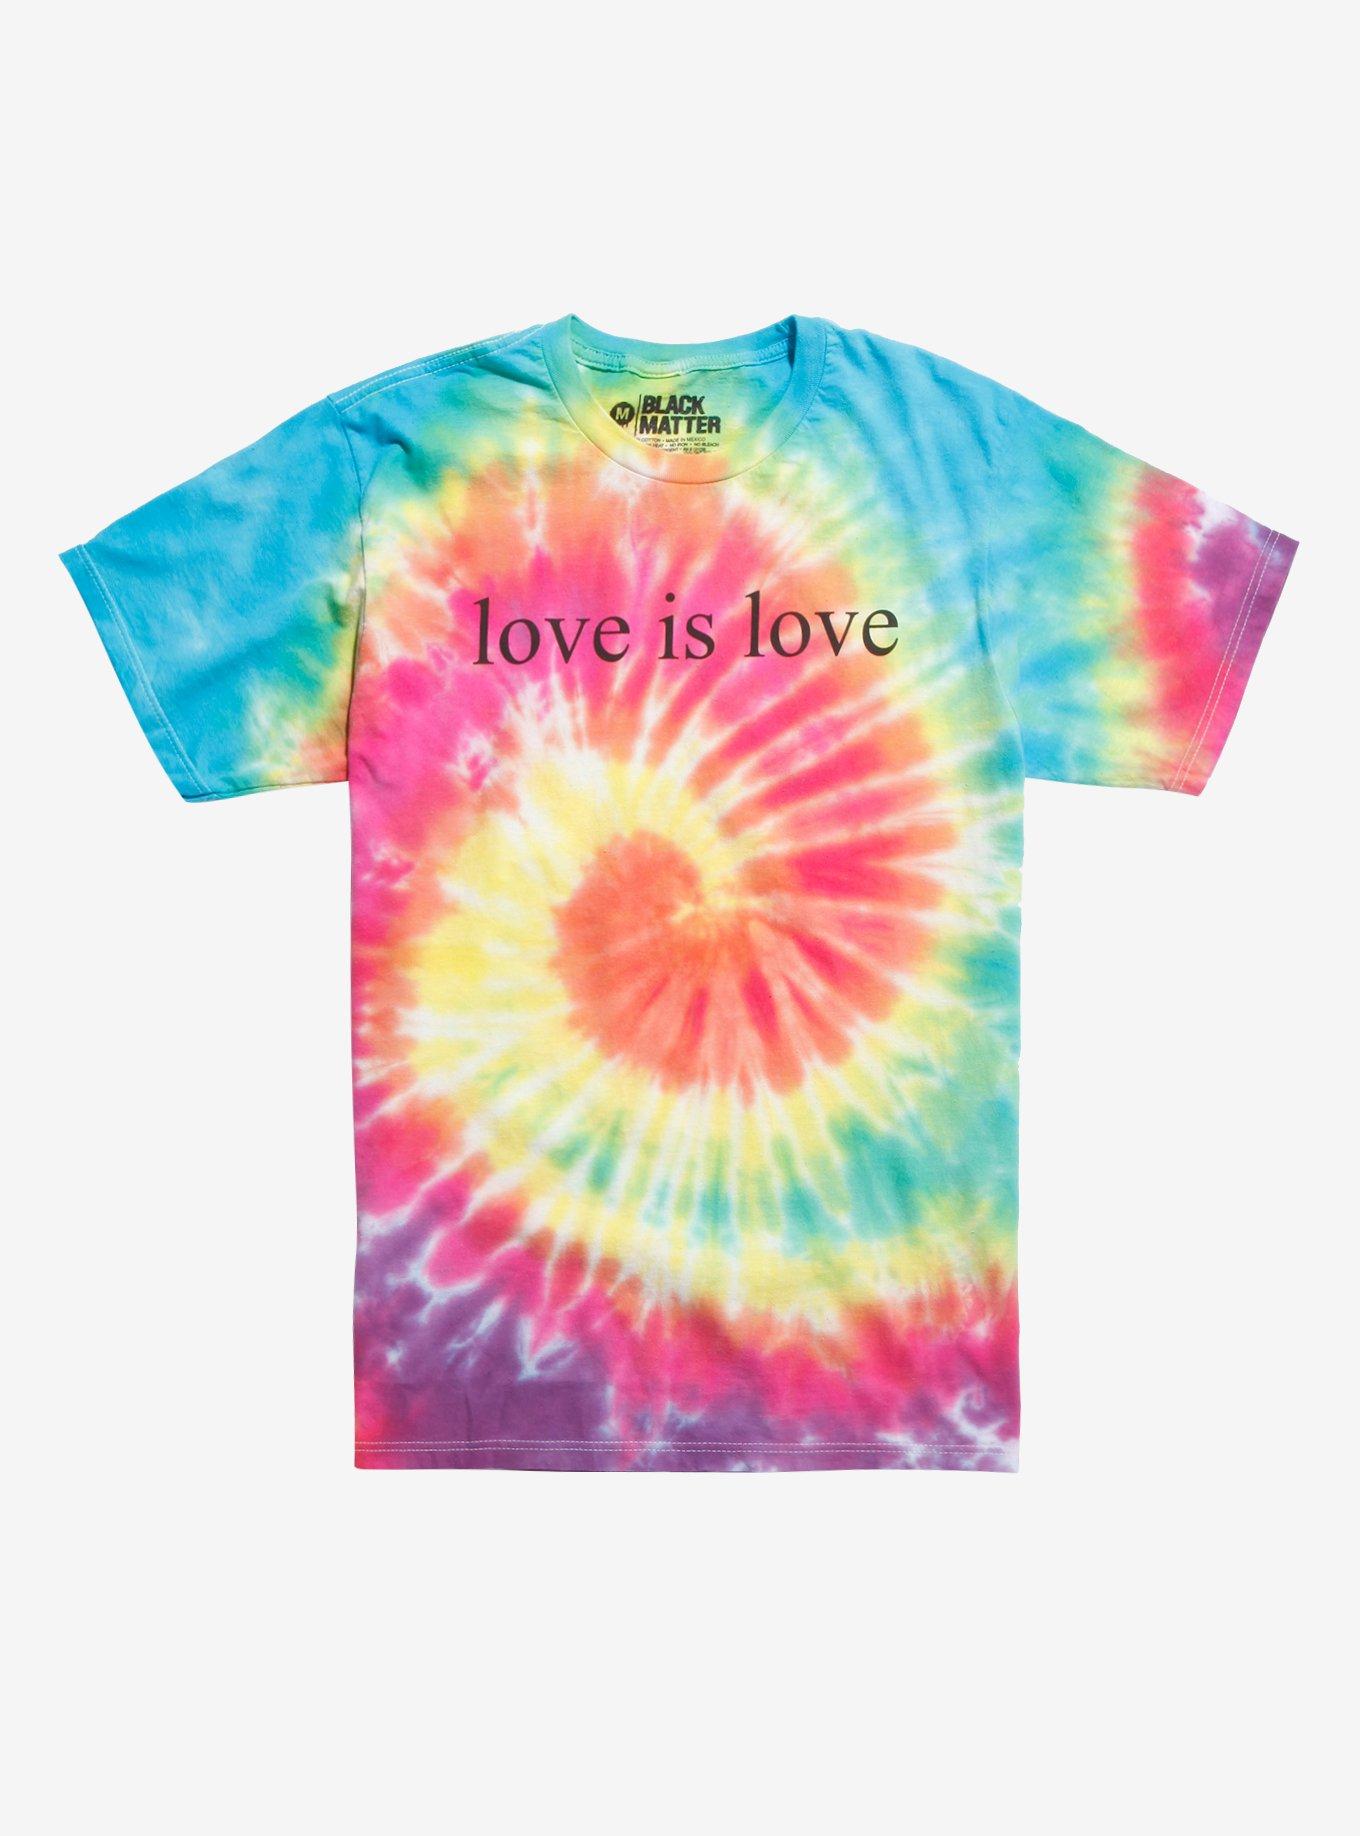 Love Is Love Tie-Dye T-Shirt Hot Topic Exclusive, MULTI, hi-res